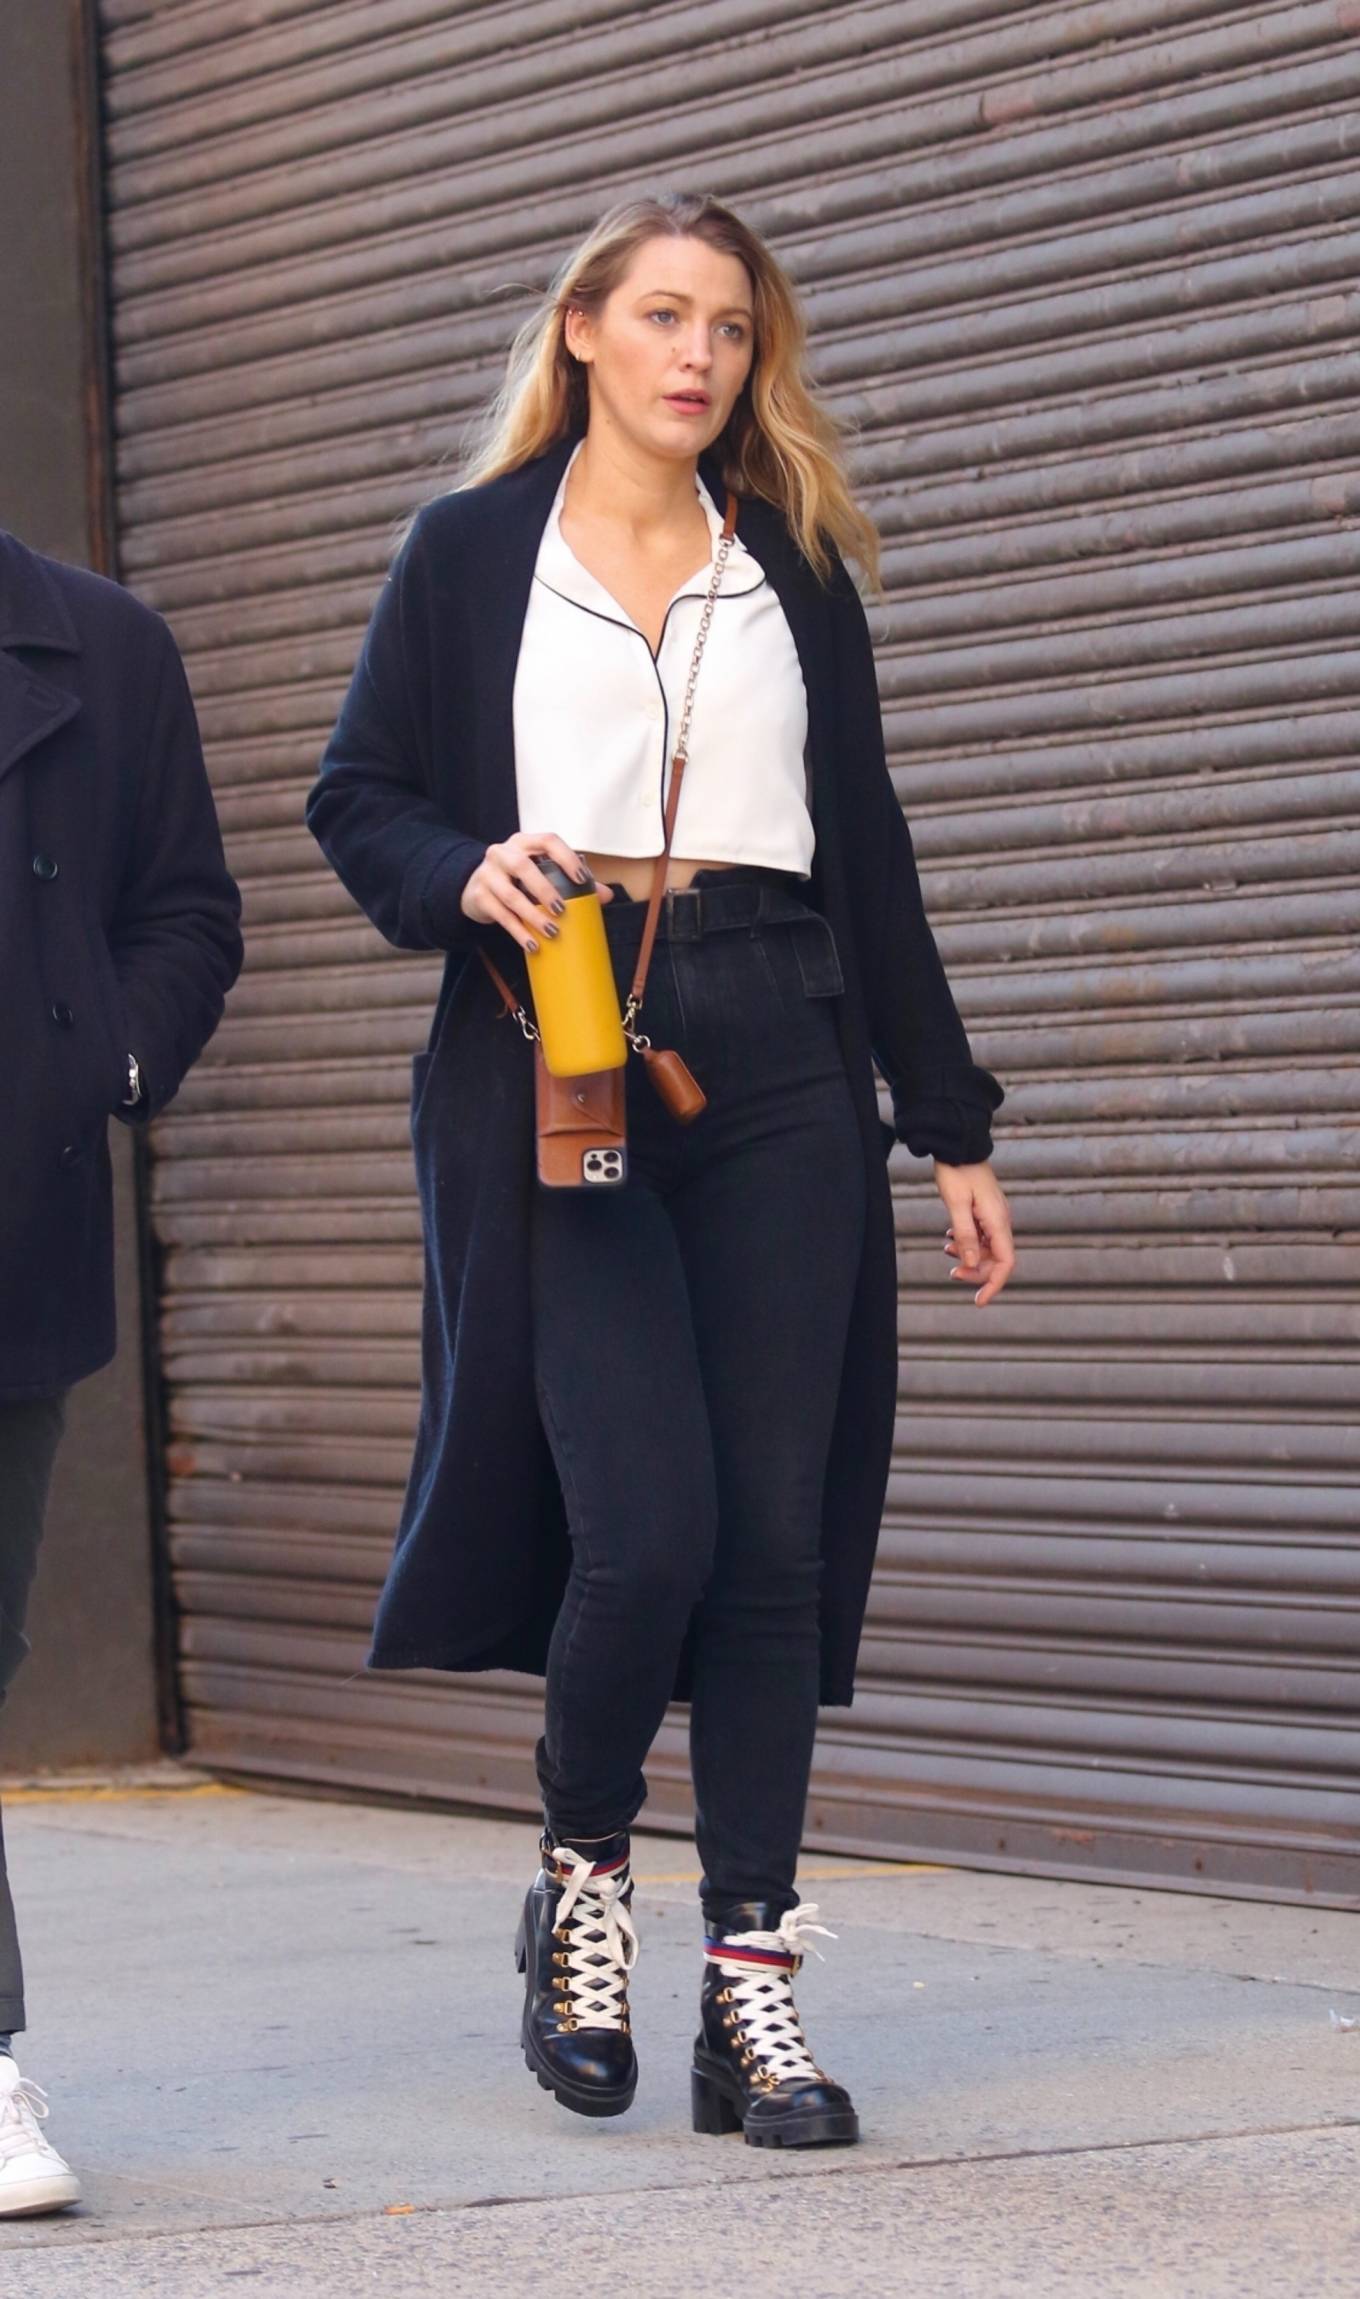 Blake Lively 2021 : Blake Lively – Out for a stroll in NYC-20